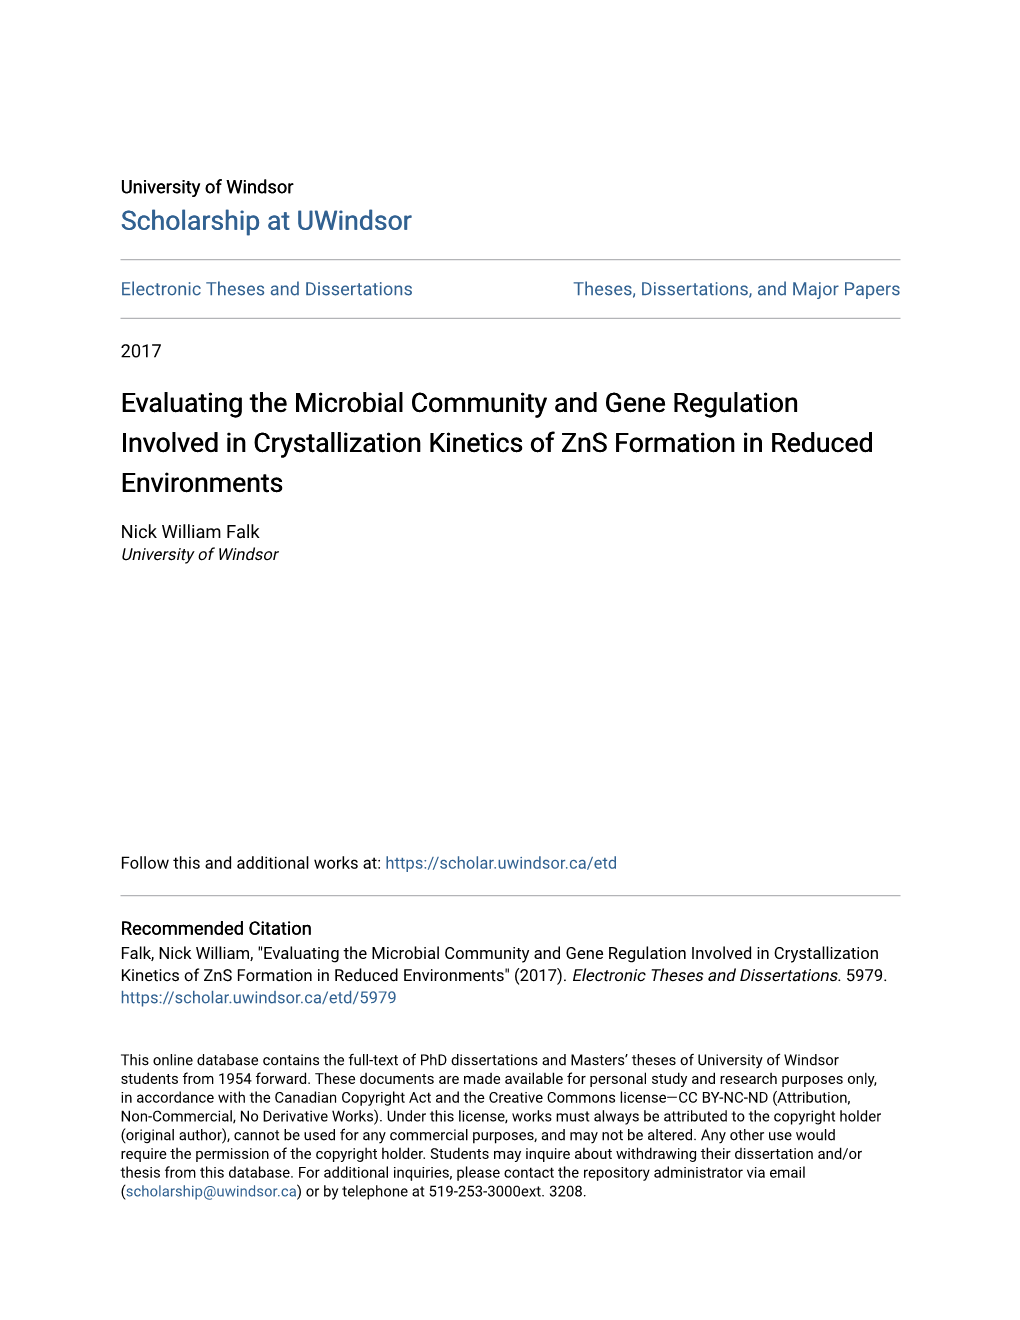 Evaluating the Microbial Community and Gene Regulation Involved in Crystallization Kinetics of Zns Formation in Reduced Environments